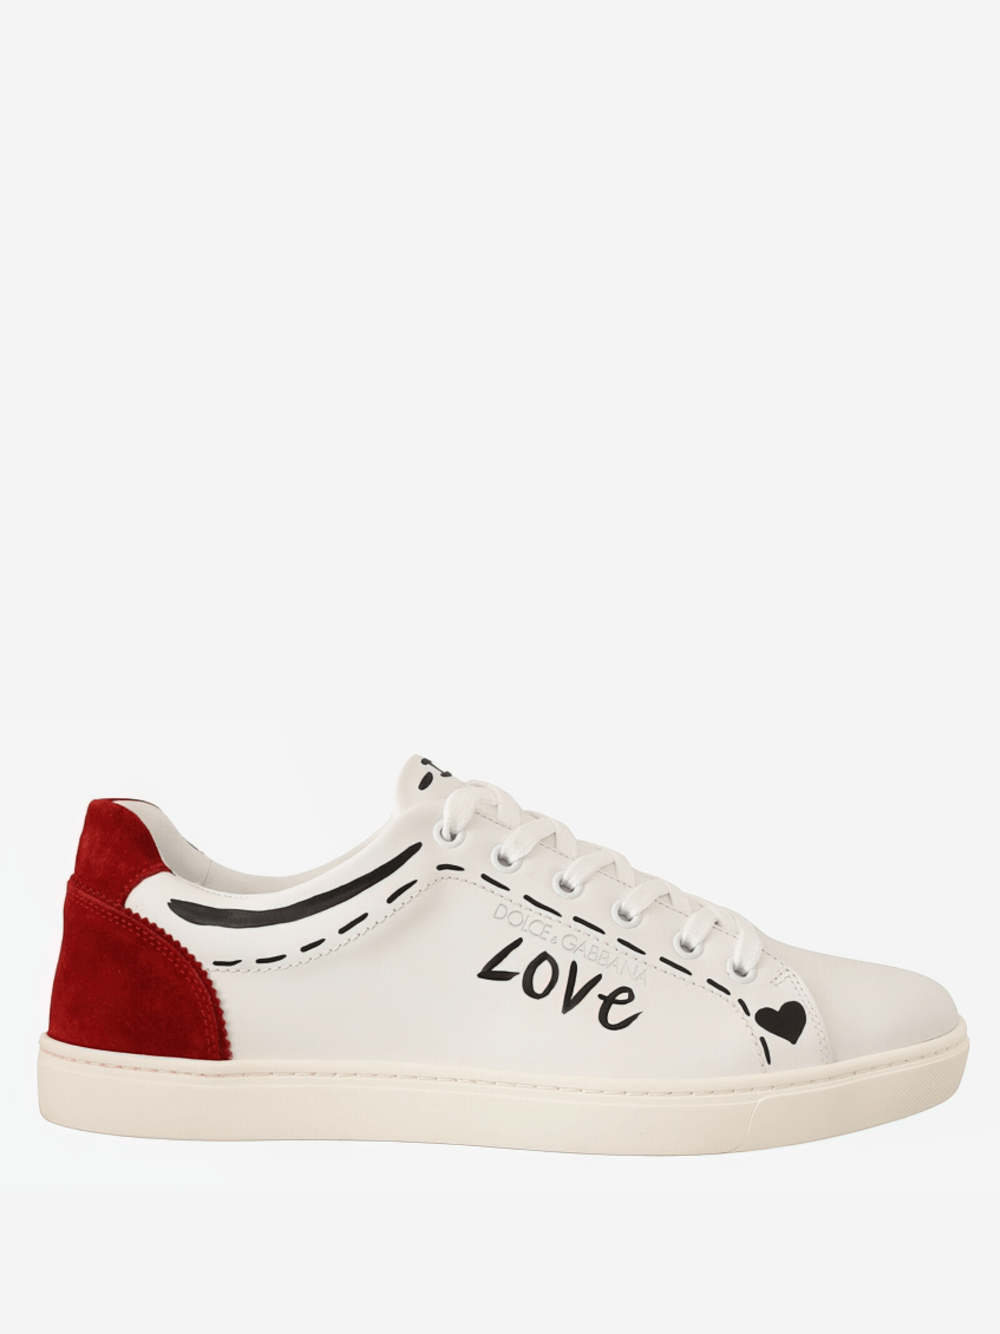 Dolce & Gabbana Graphic Logo Low-Top Sneakers